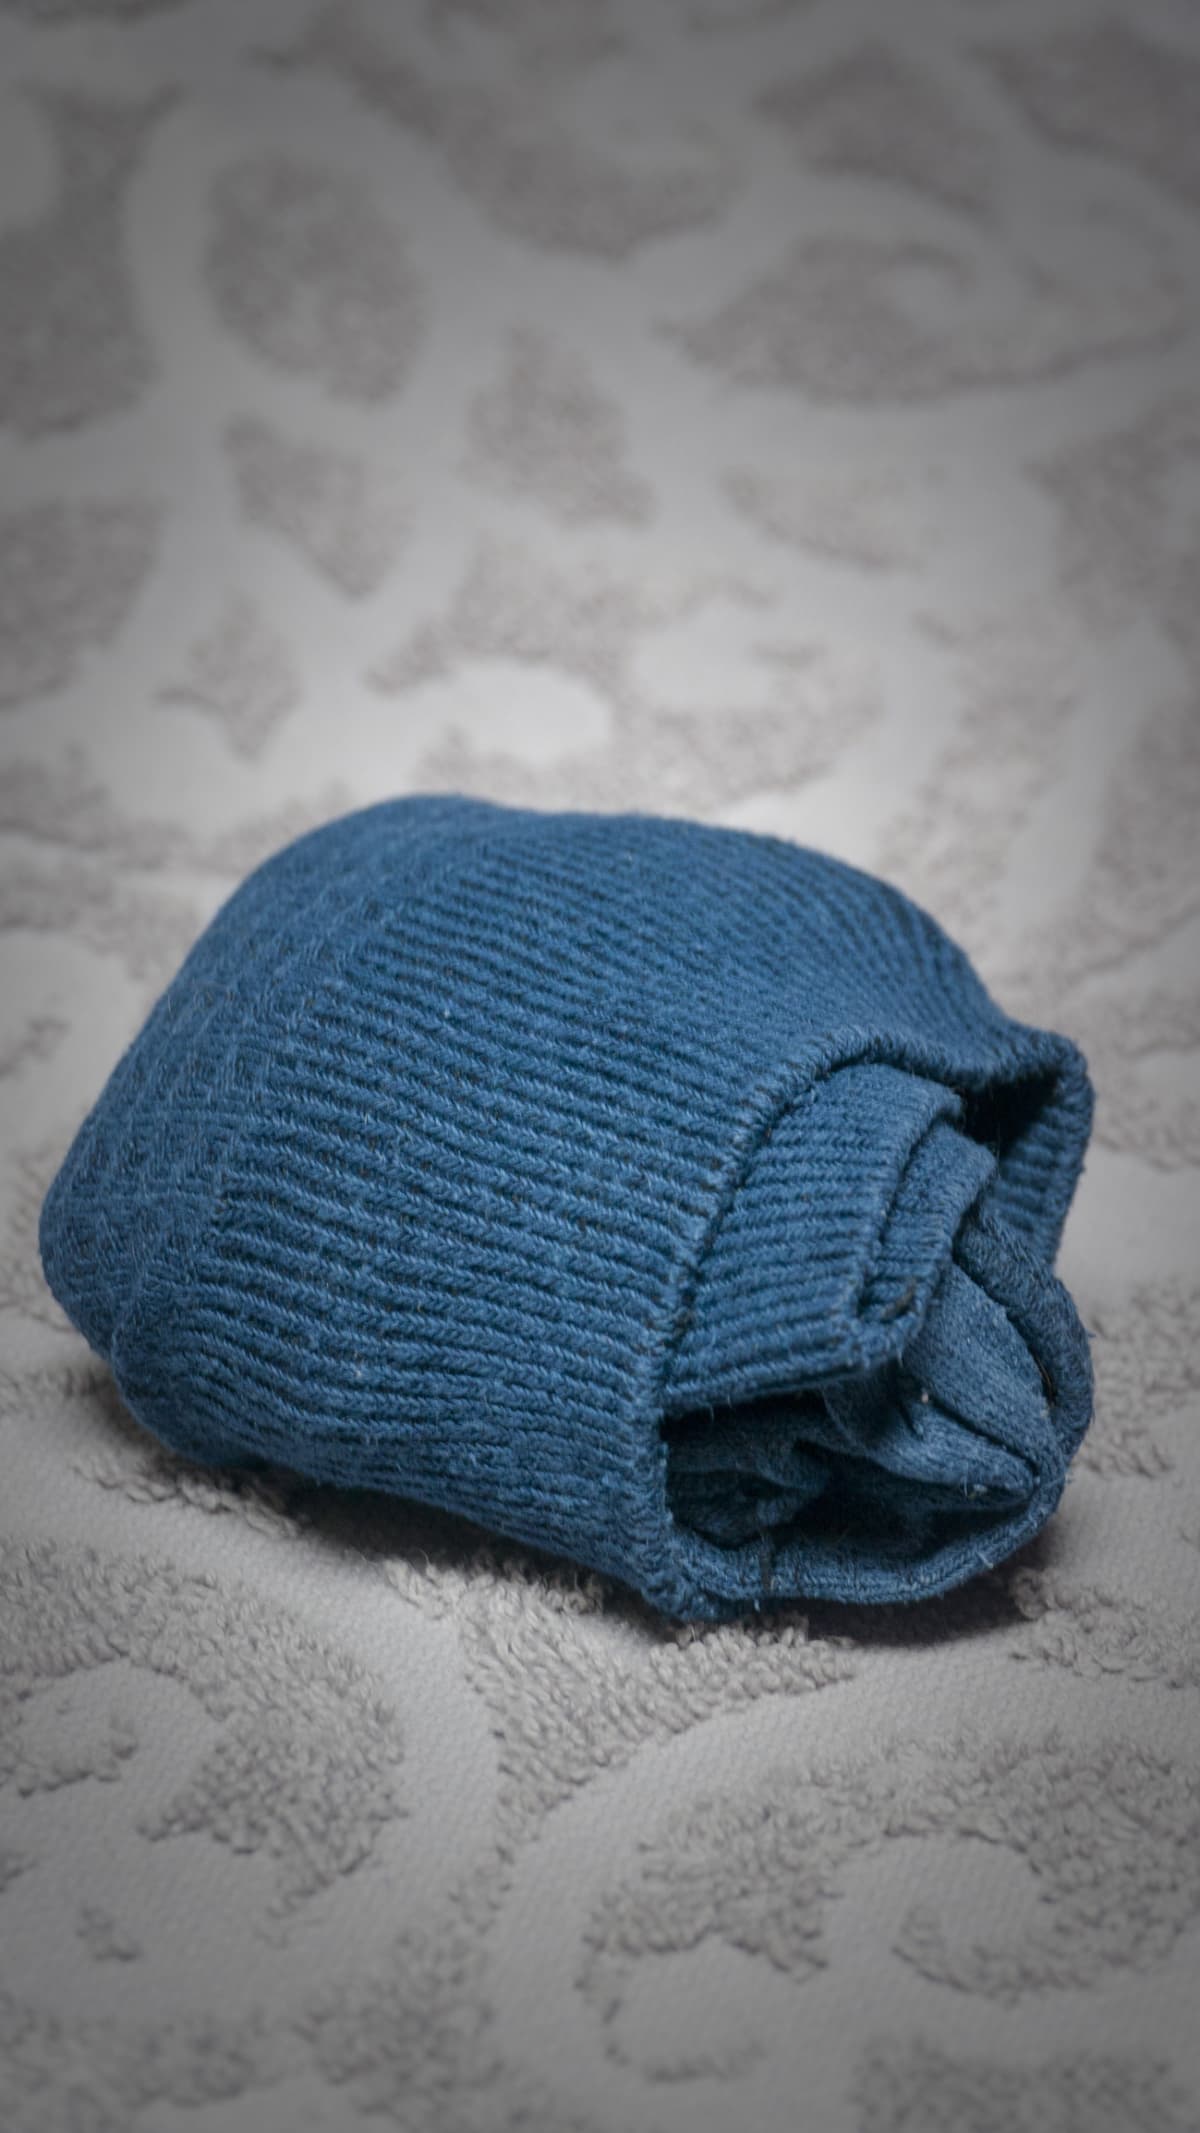 Pair of blue socks folded in the shape of a ball on a grey textile background with relief